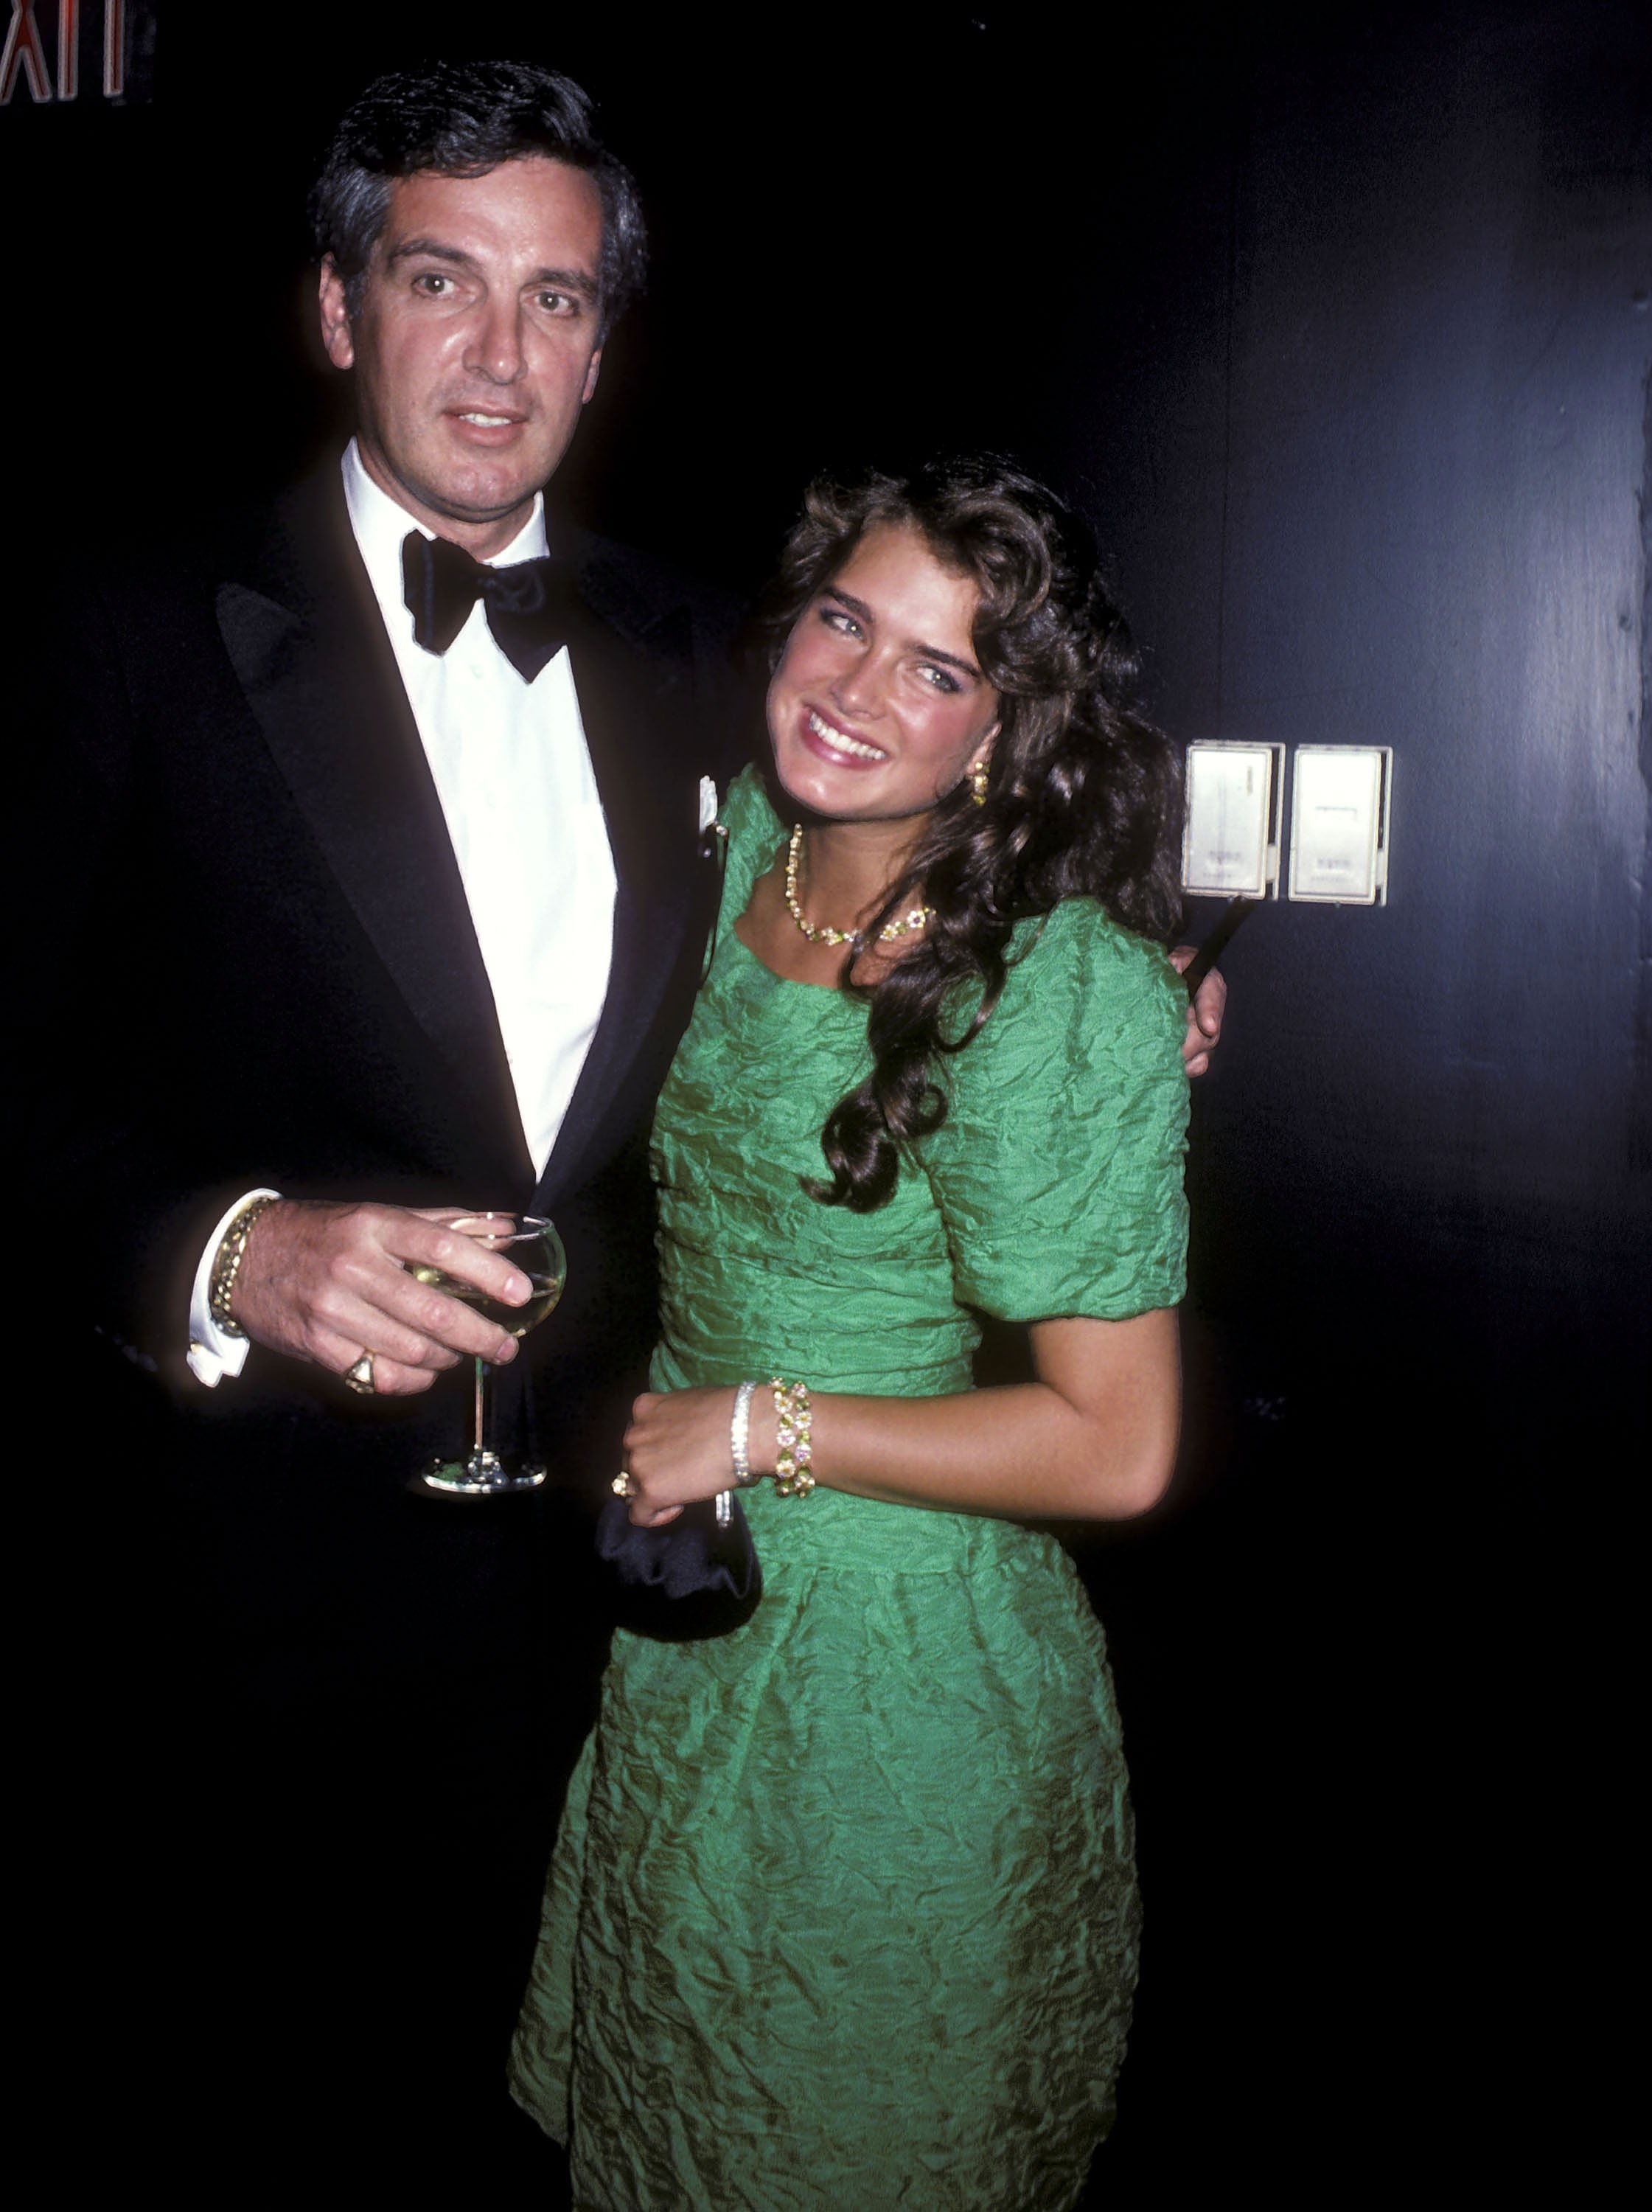 Francis Aelxander Shields, Jr. attends his daughter Brooke Shields' 21st Birthday party on March 31, 1986 at Nishi Noho, New York City. | Source: Getty Images